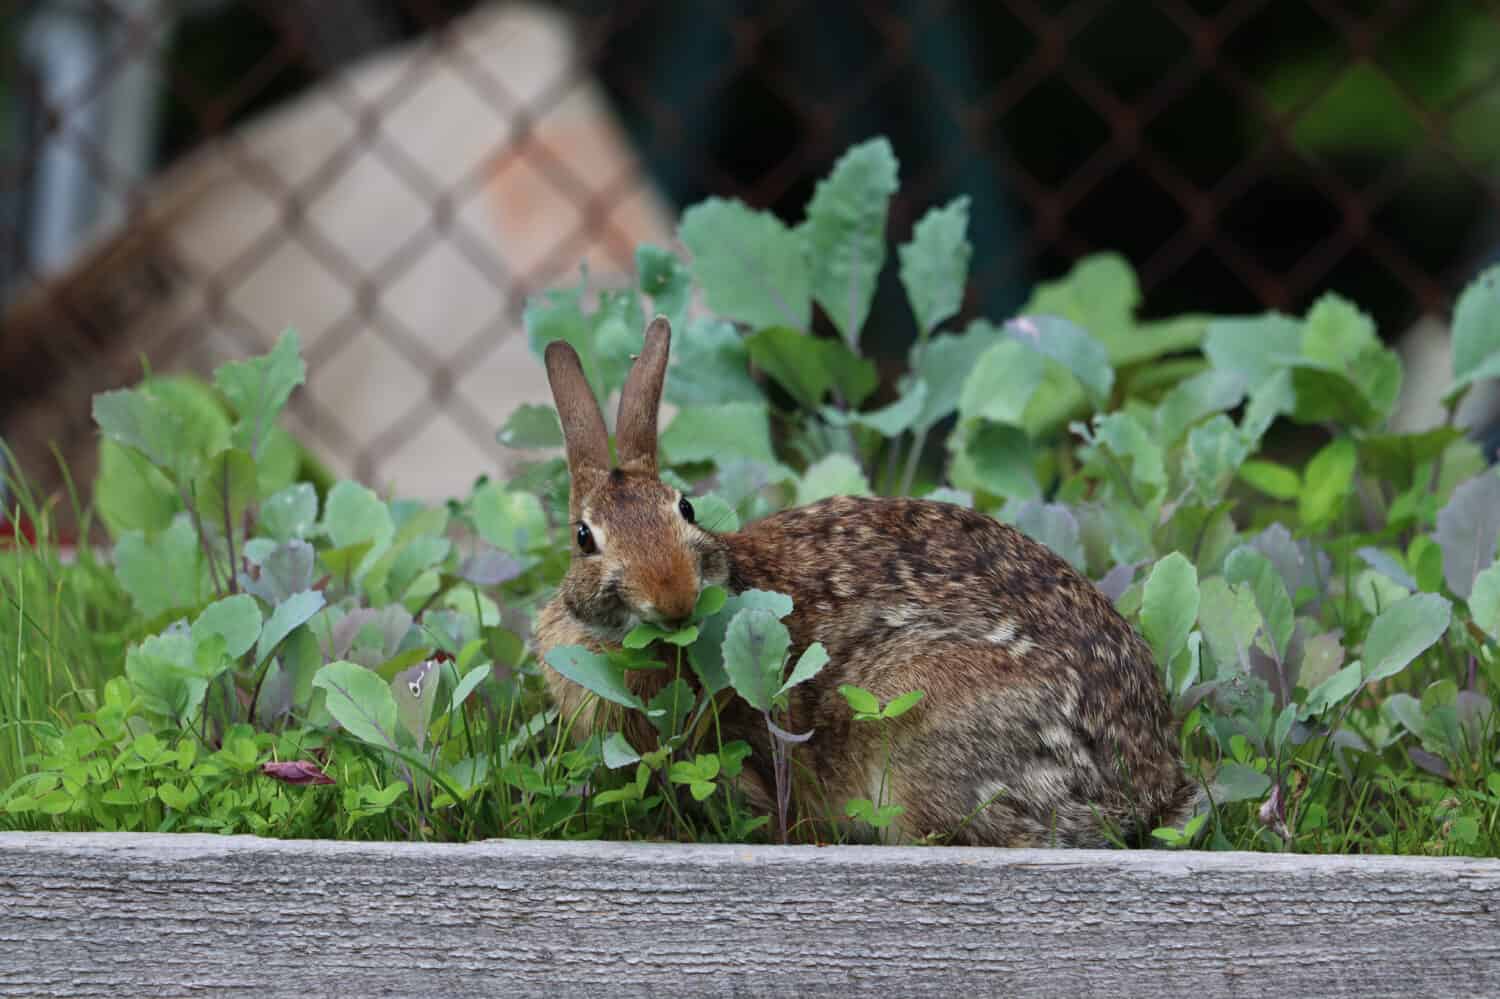 An eastern cottontail rabbit snacking on leaves in a vegetable garden